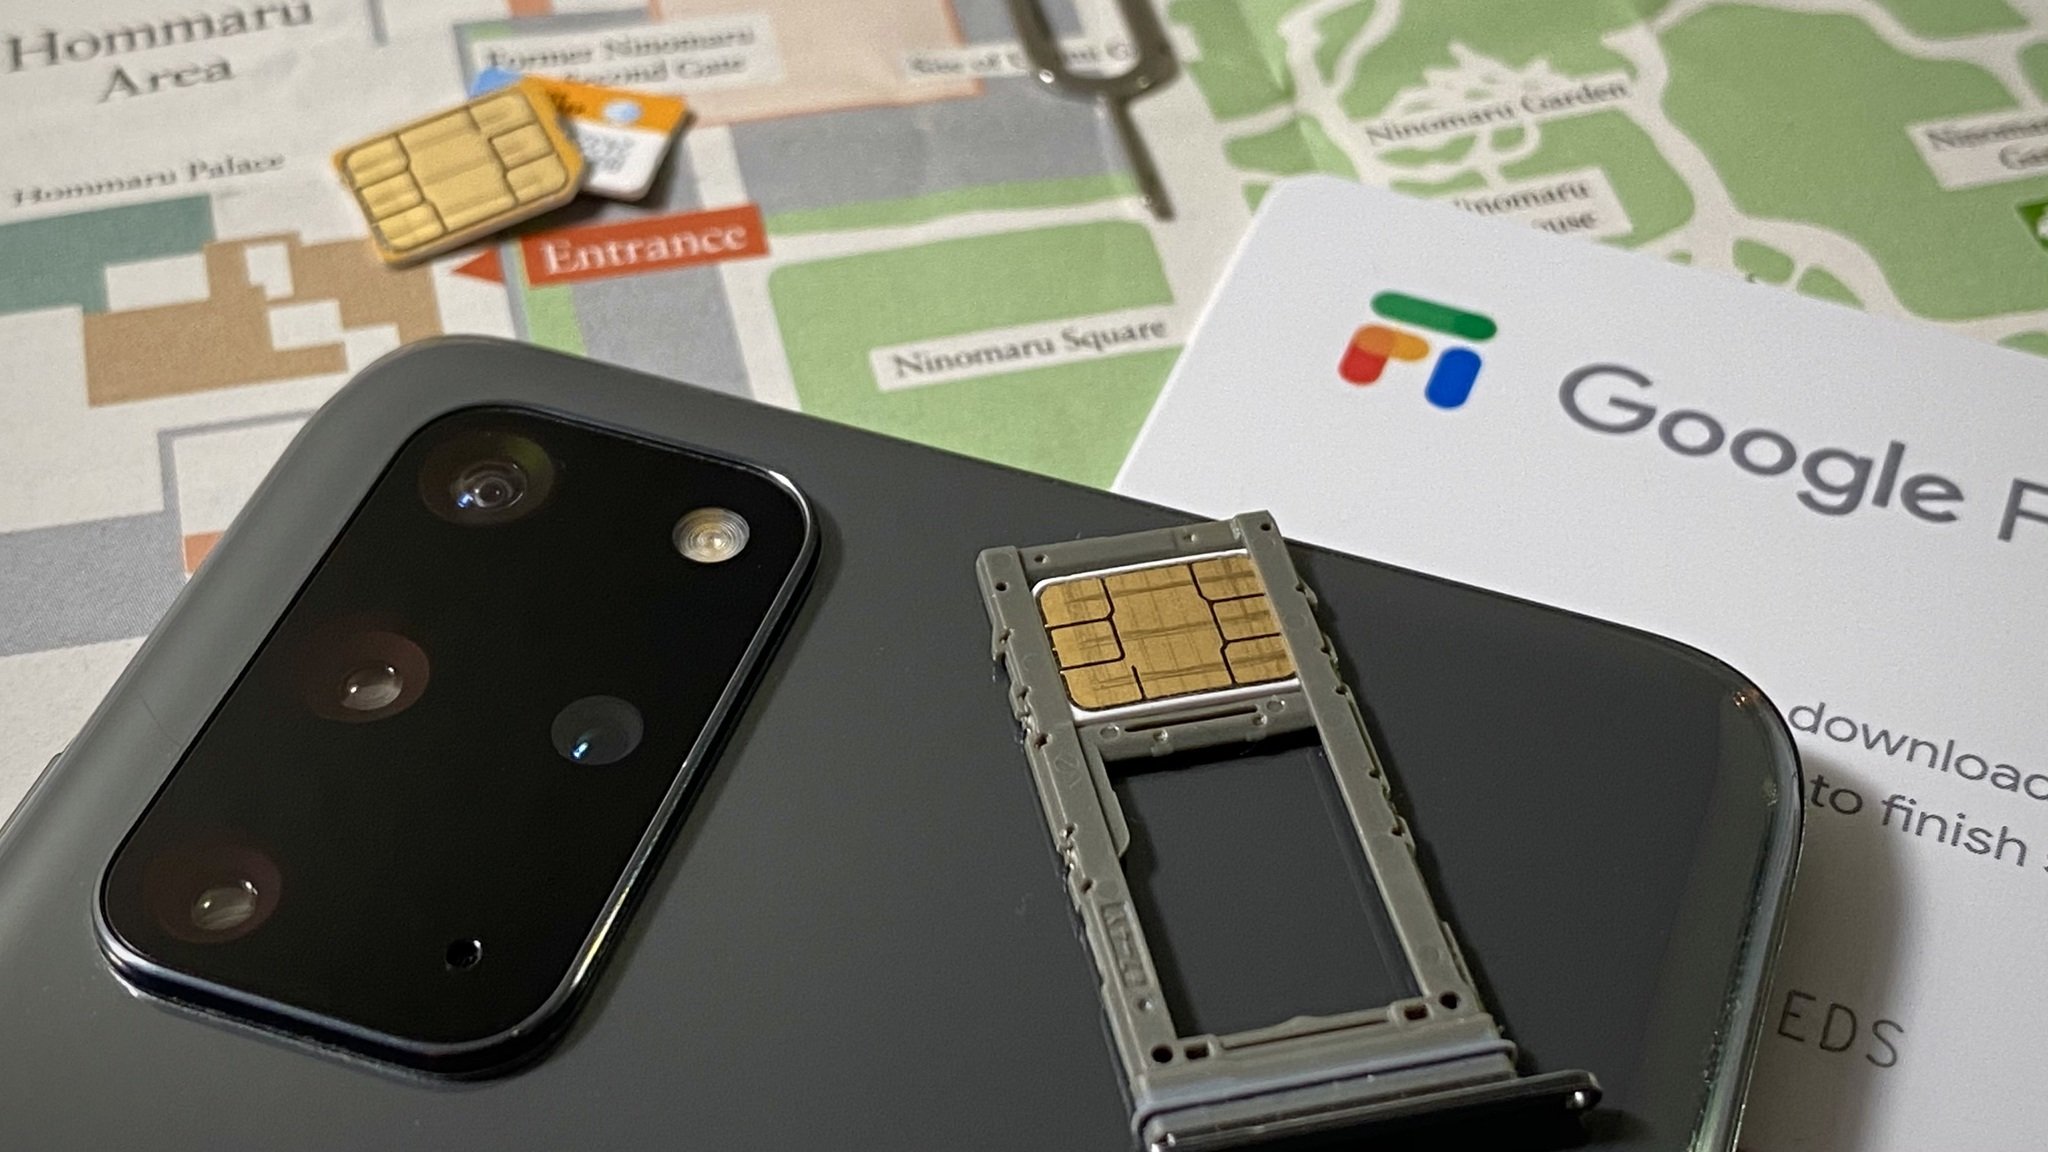 How Google Fi is Revolutionizing the Mobile Industry - Functions and advantages of data-only SIM card